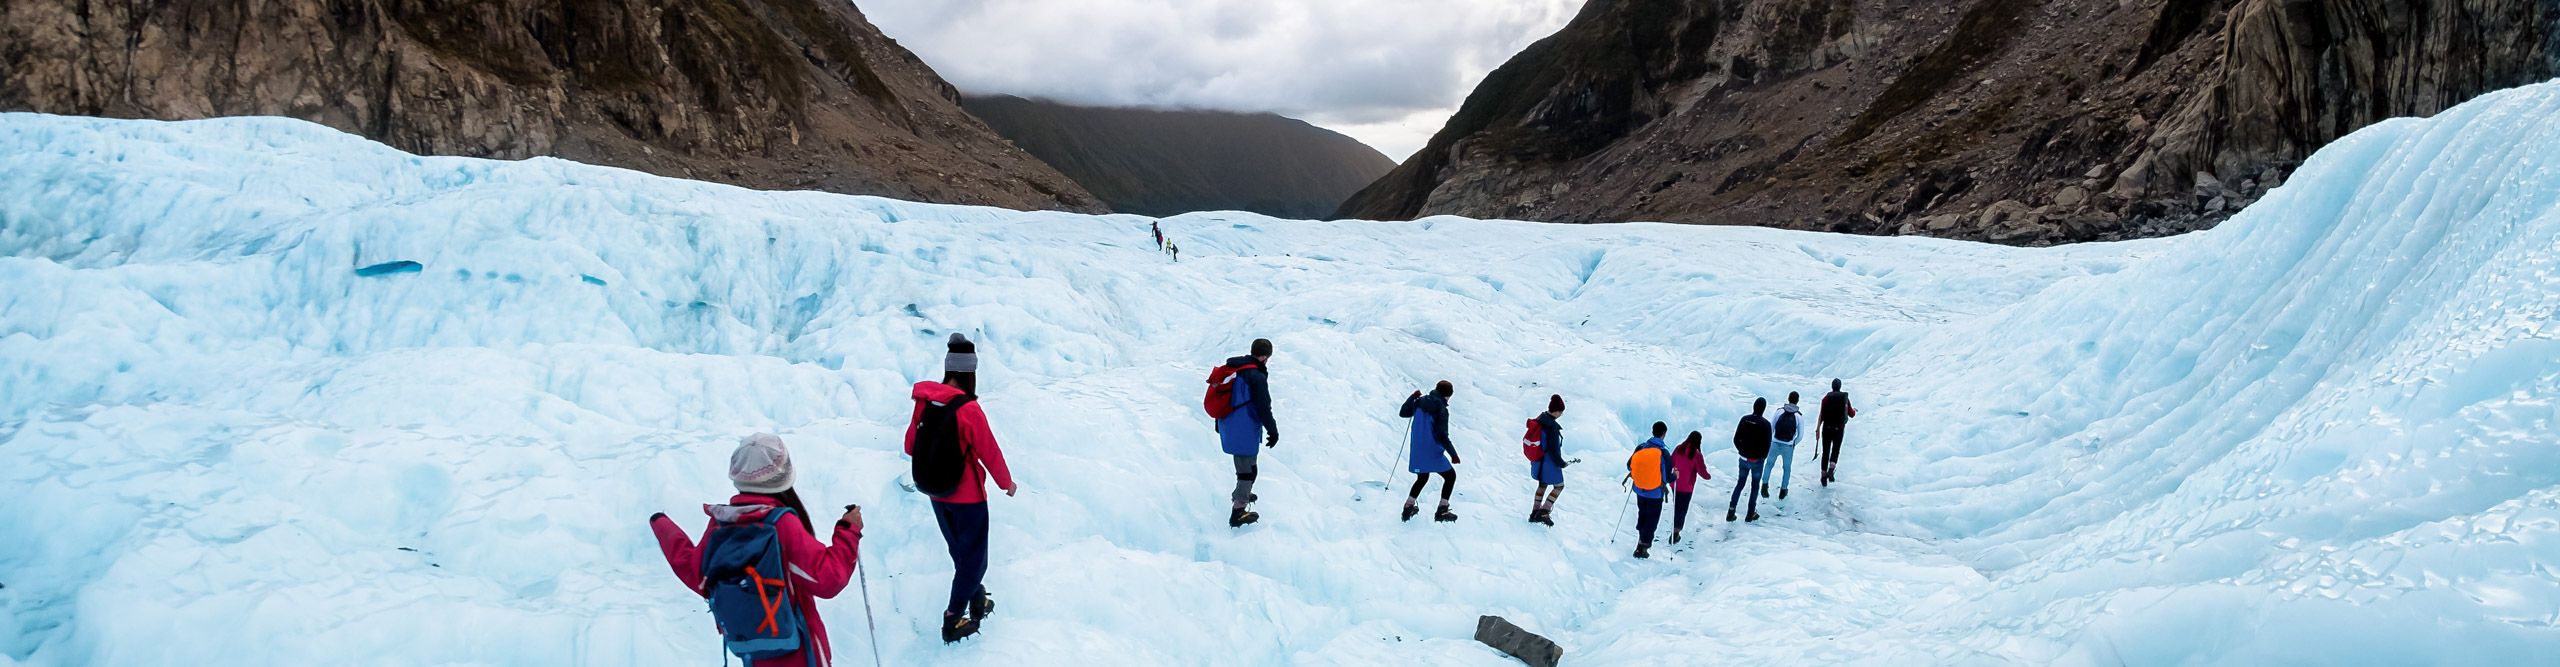 Hikers and travelers walking on ice in Fox Glacier, New Zealand. 